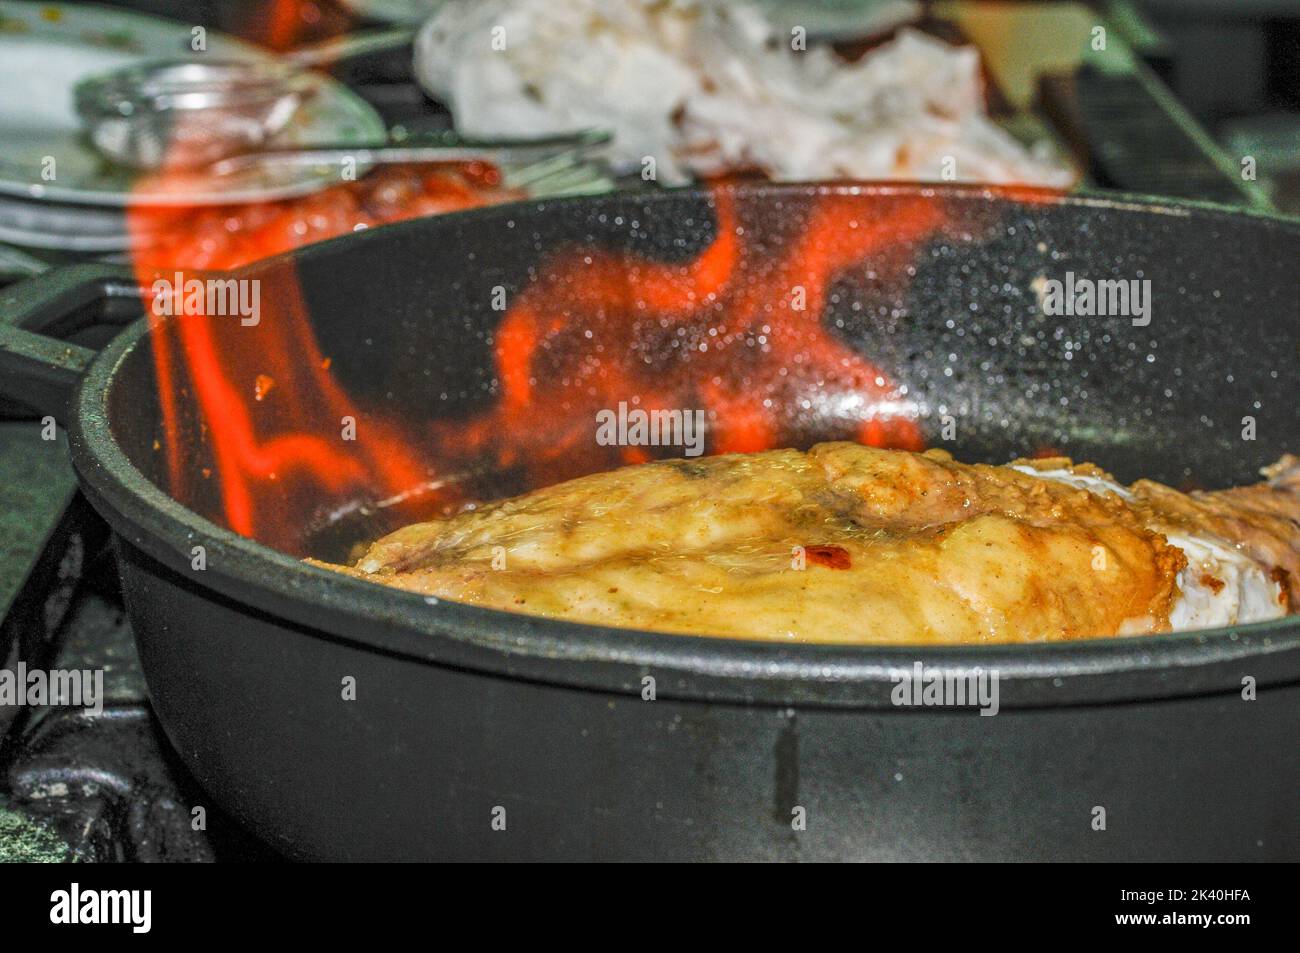 Flambeed sole Meuniere with brandy. Stock Photo